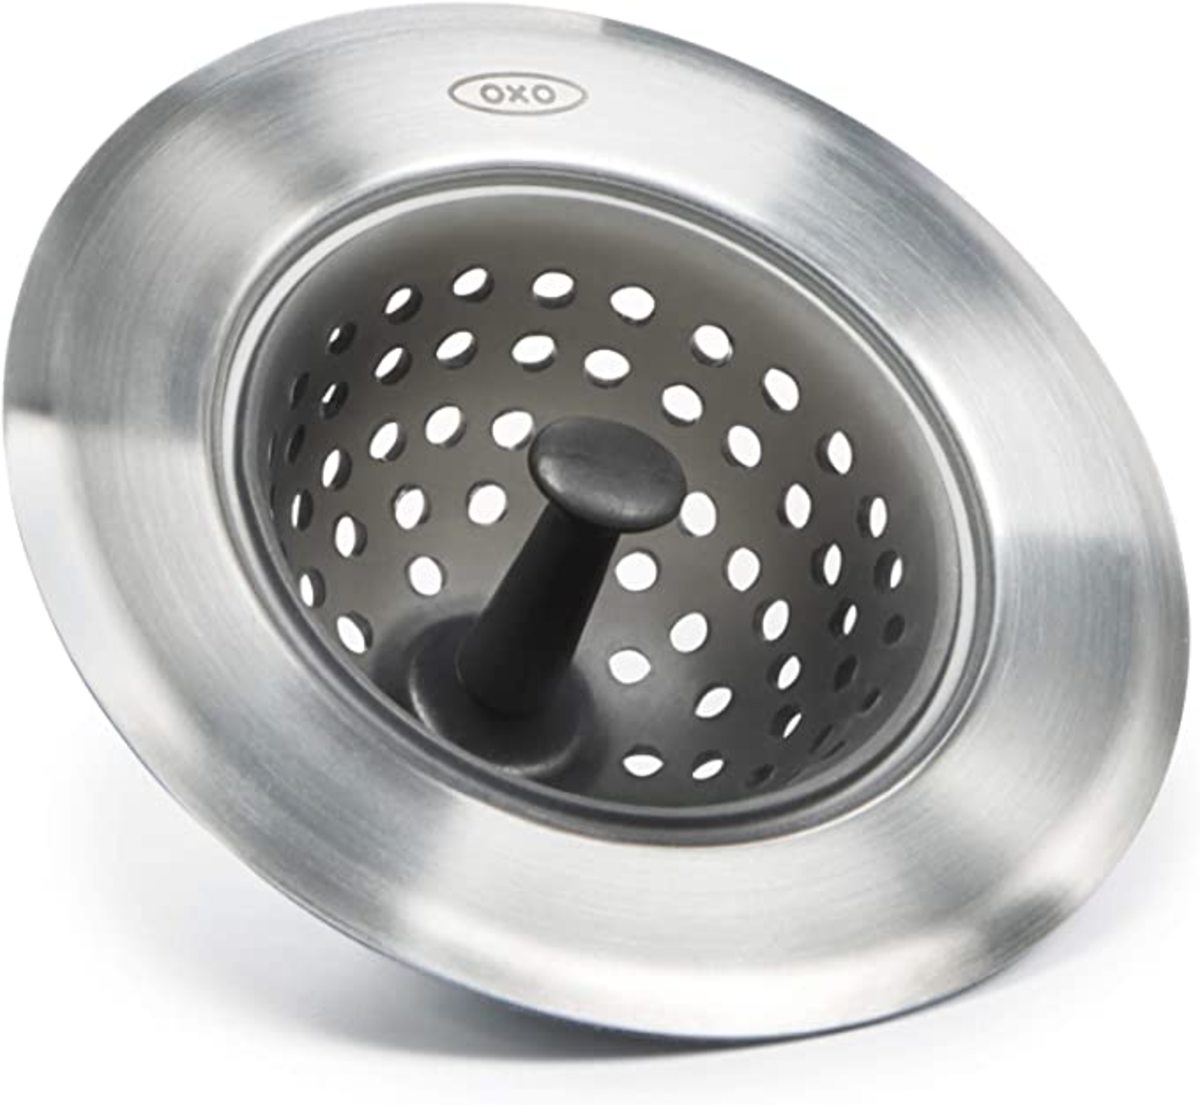 The OXO Good Grips silicone sink strainer